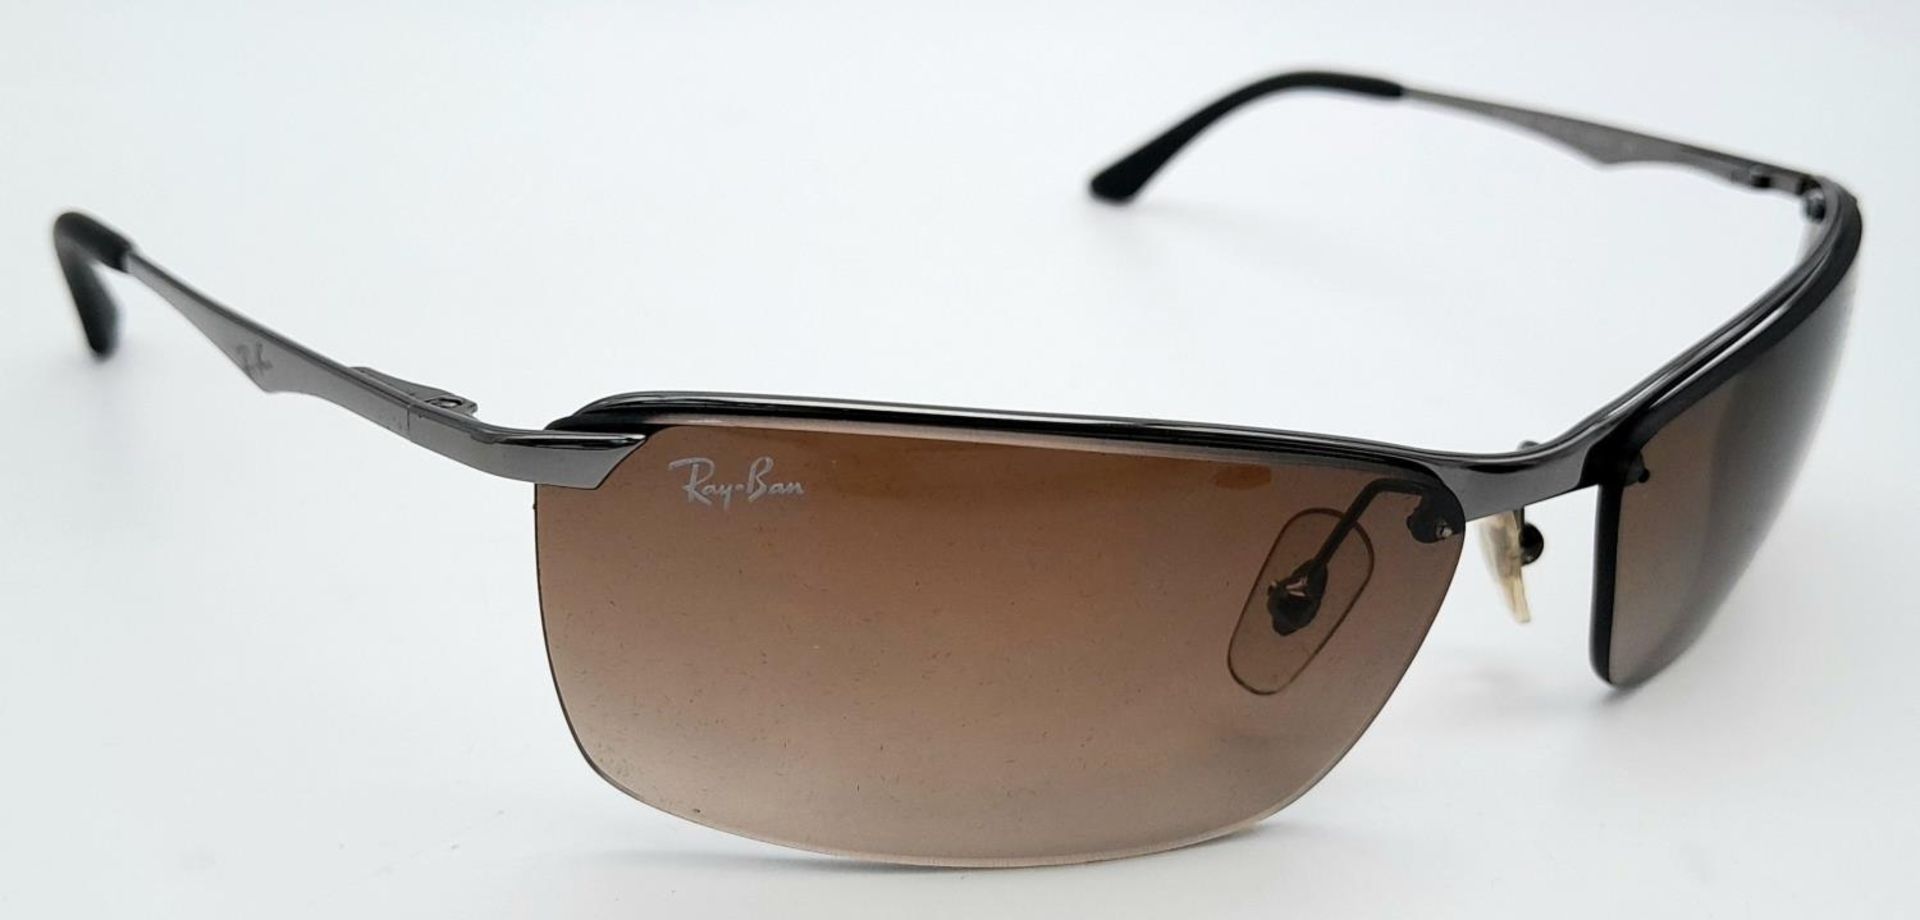 A Pair of Ray Ban Sunglasses - With case that needs restitching. - Image 4 of 8